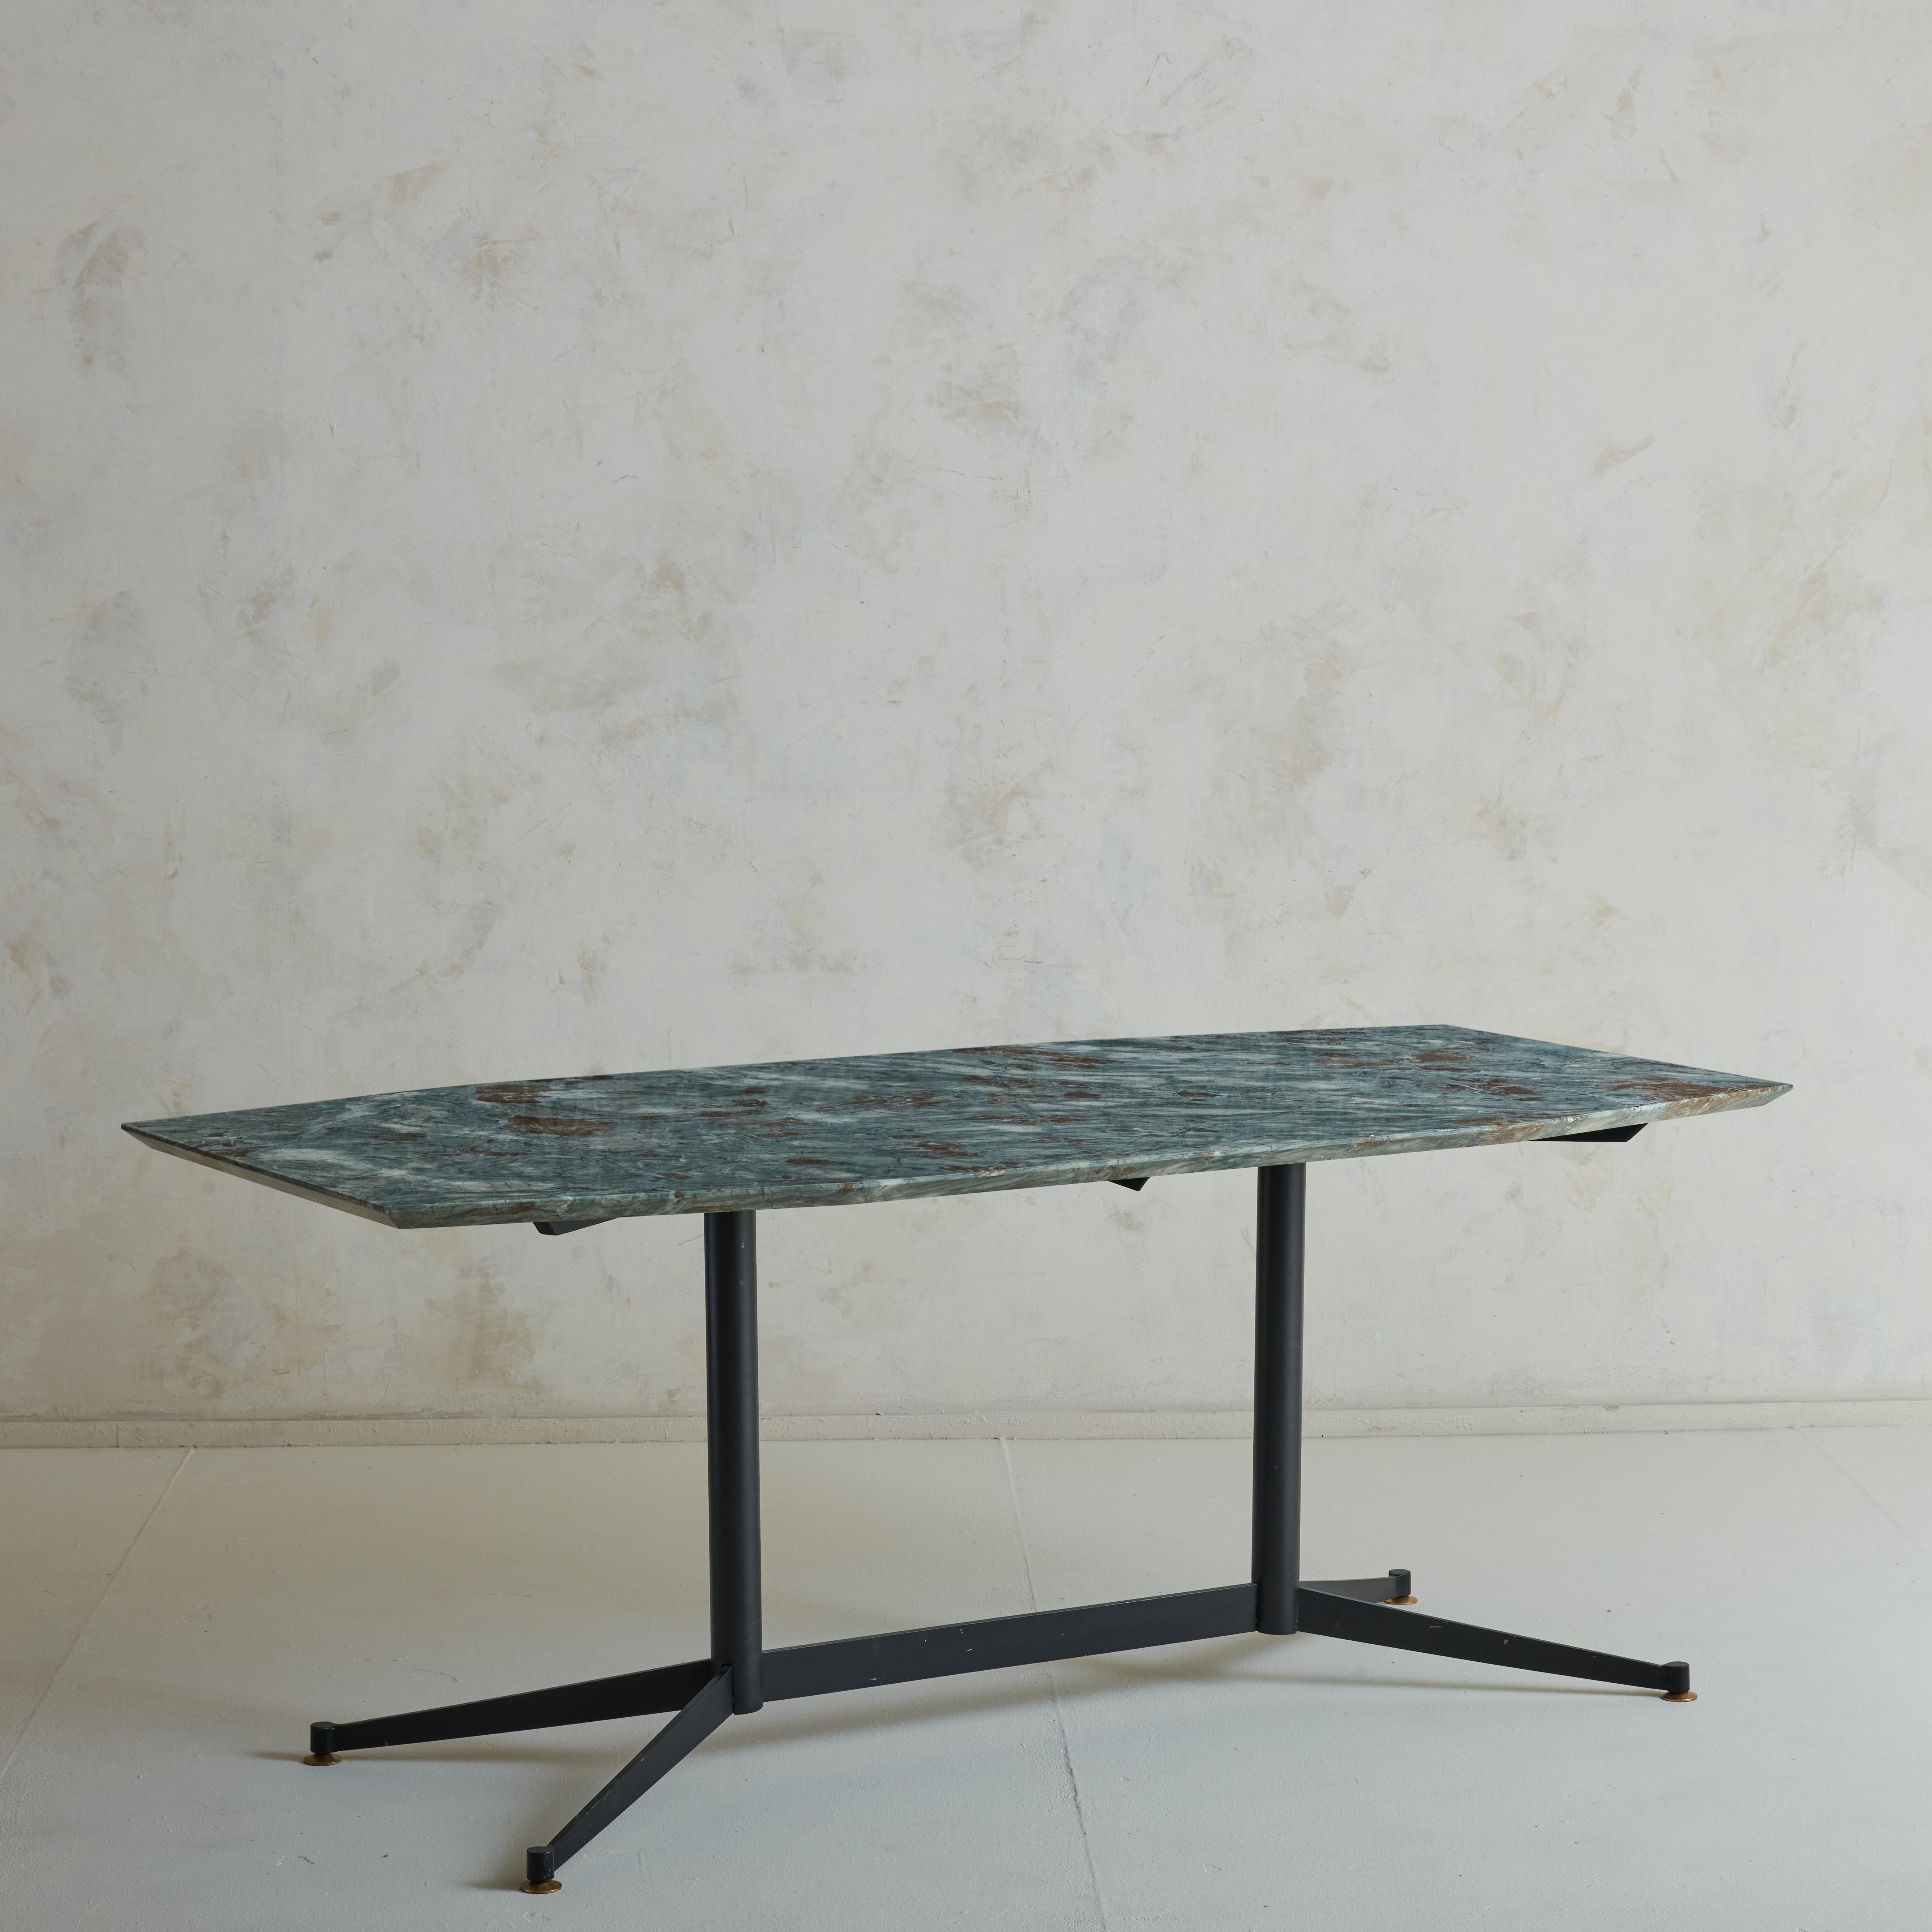 A Mid-Century modern dining table featuring  Green Octagonal Marble Top with Beveled Edge, and black steel trastle legs with brass feet details. In the style of Ignazio Gardella.

Ignazio Gardella is an Italian architect, engineer and designer who